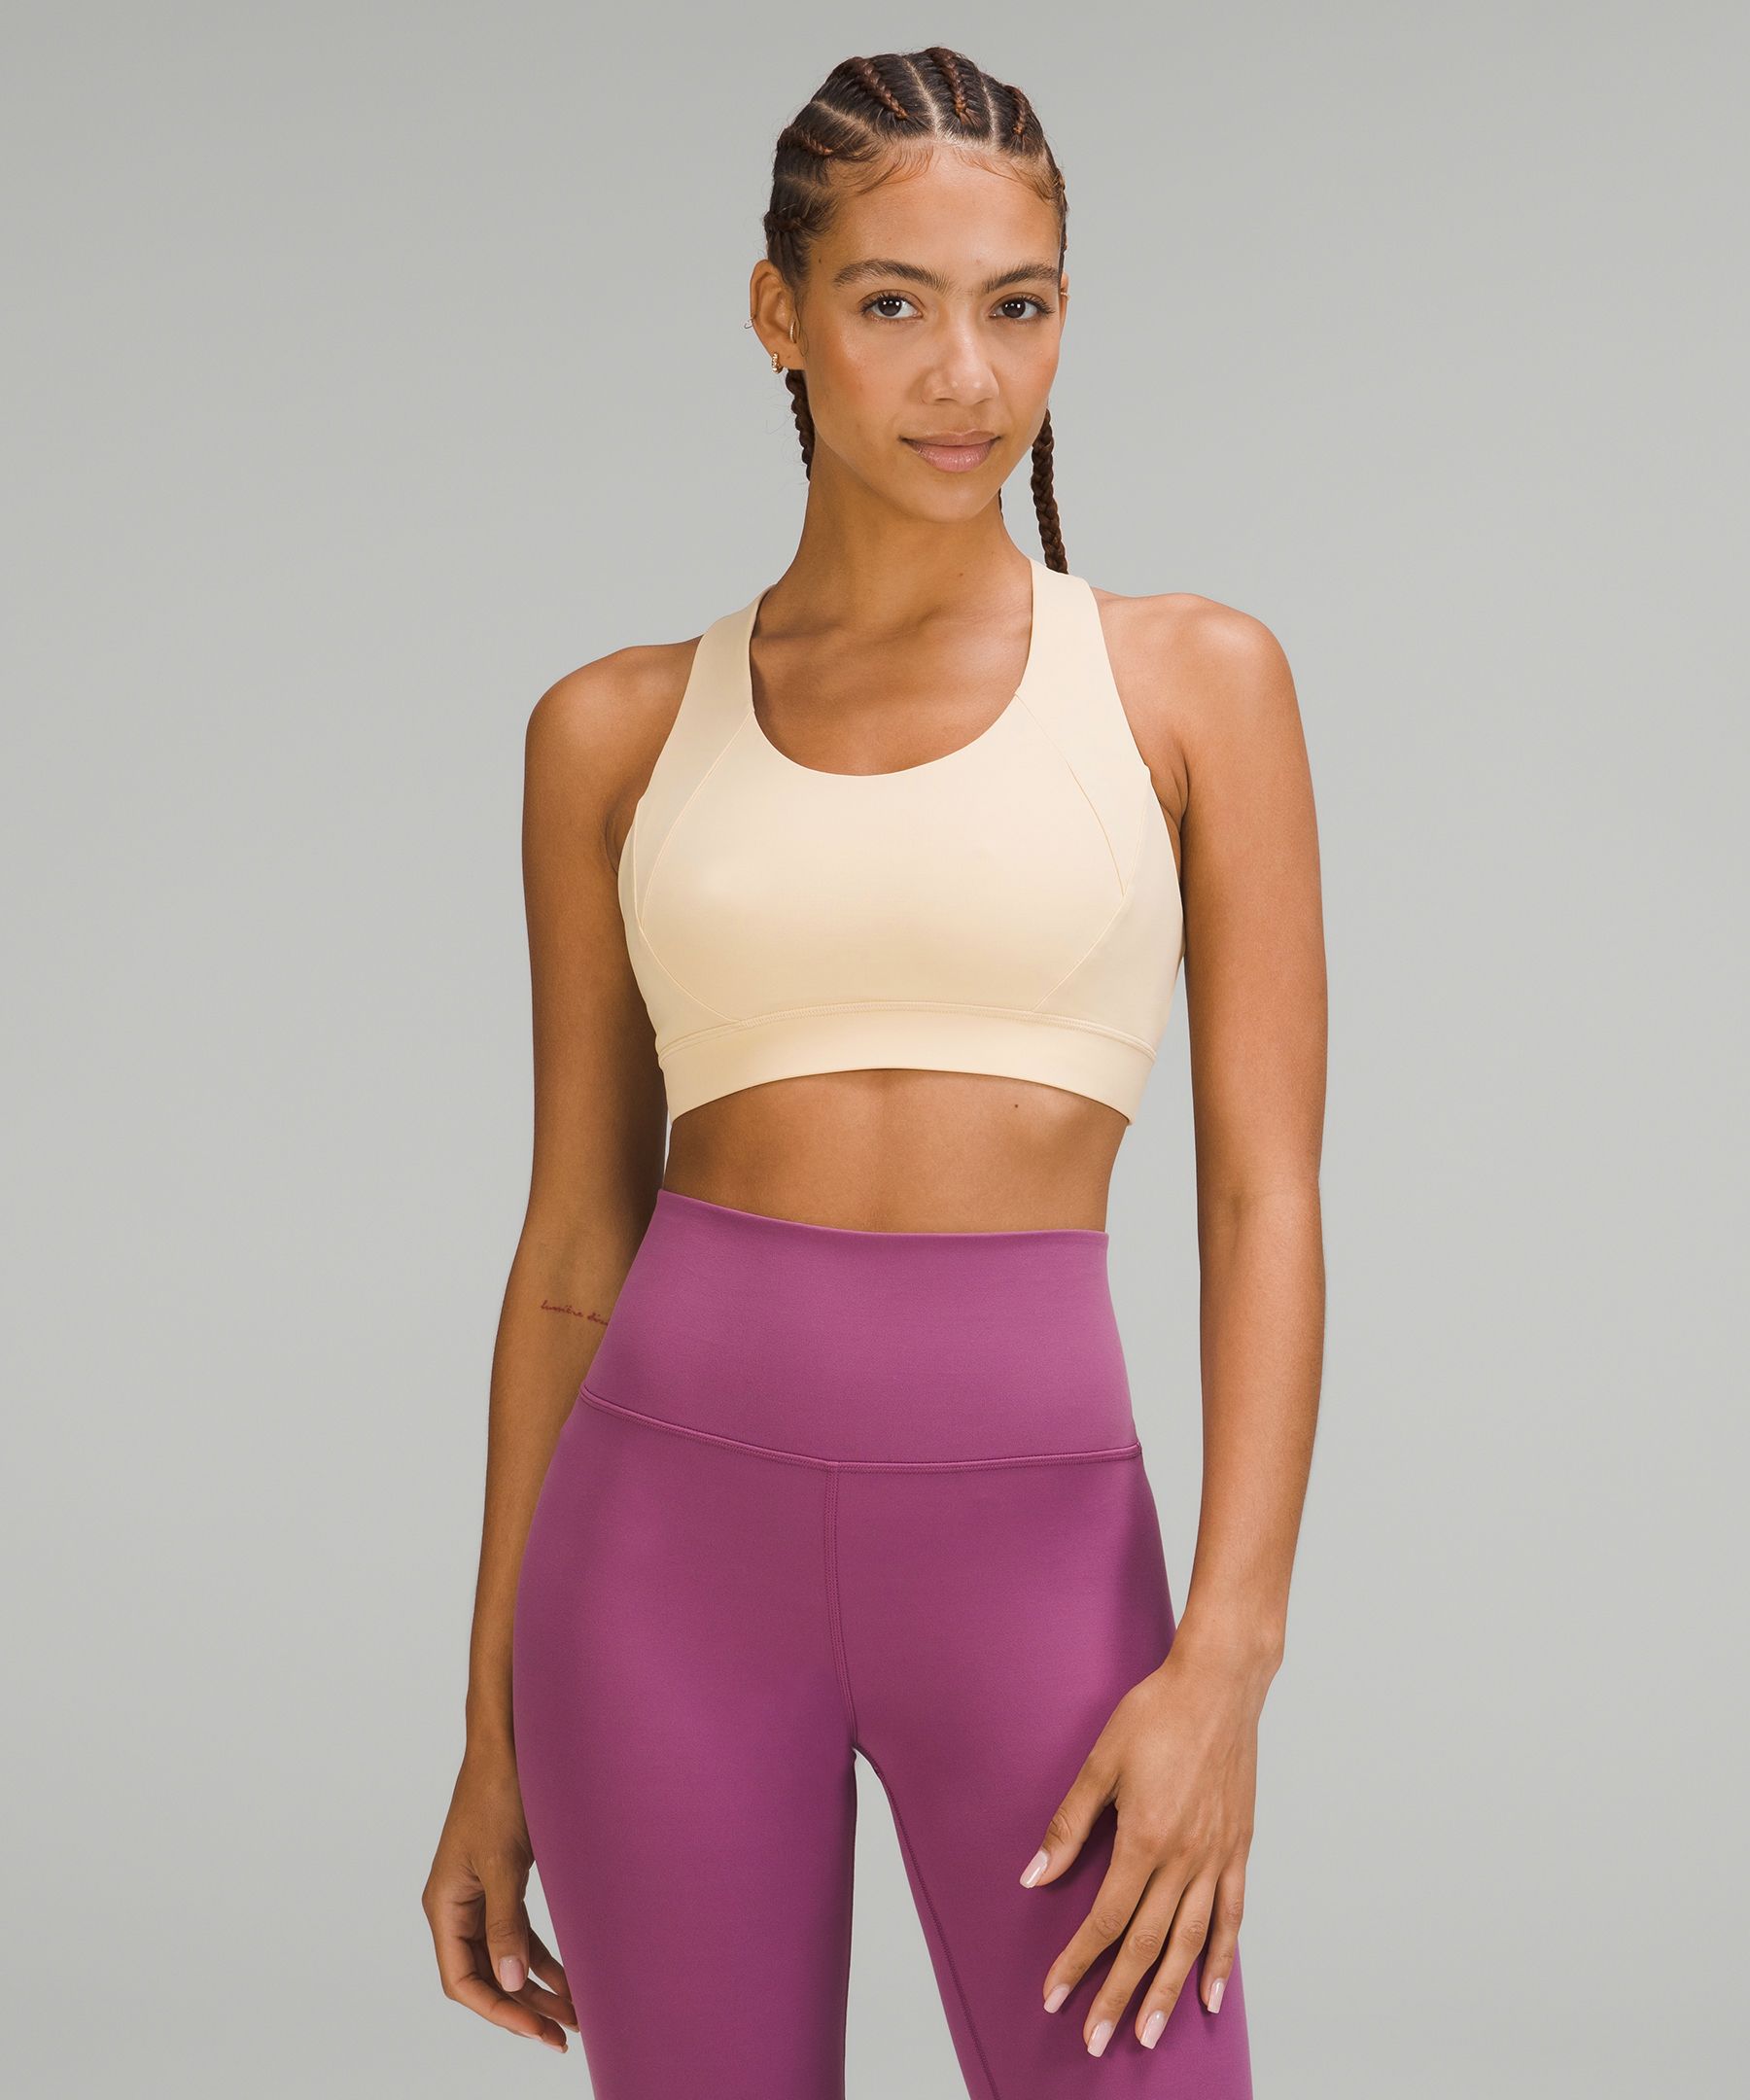 Lululemon Free To Be Elevated Bra Light Support, Dd/ddd(e) Cup In Prosecco